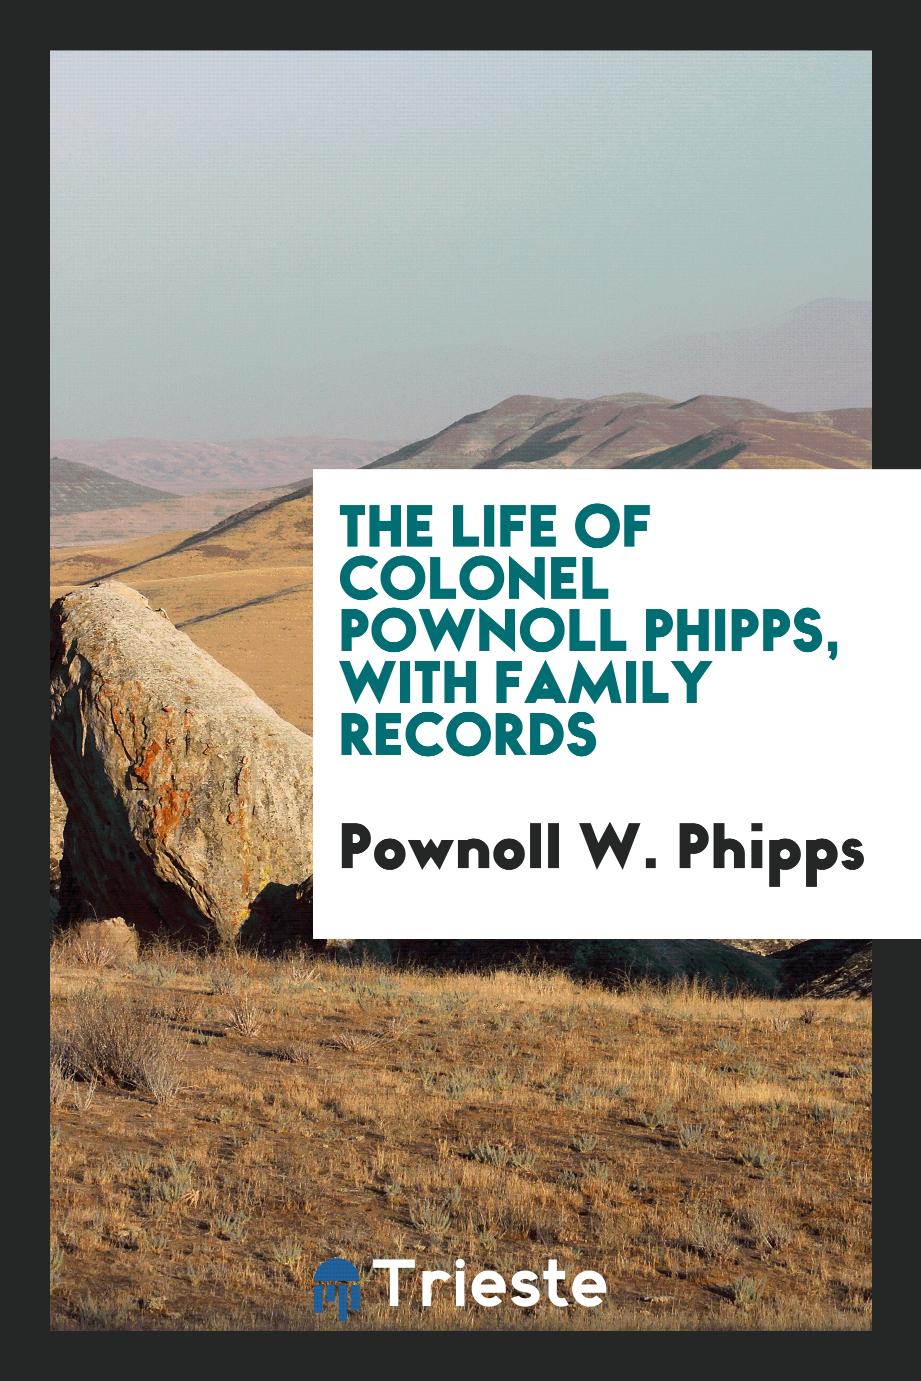 The Life of Colonel Pownoll Phipps, with family records